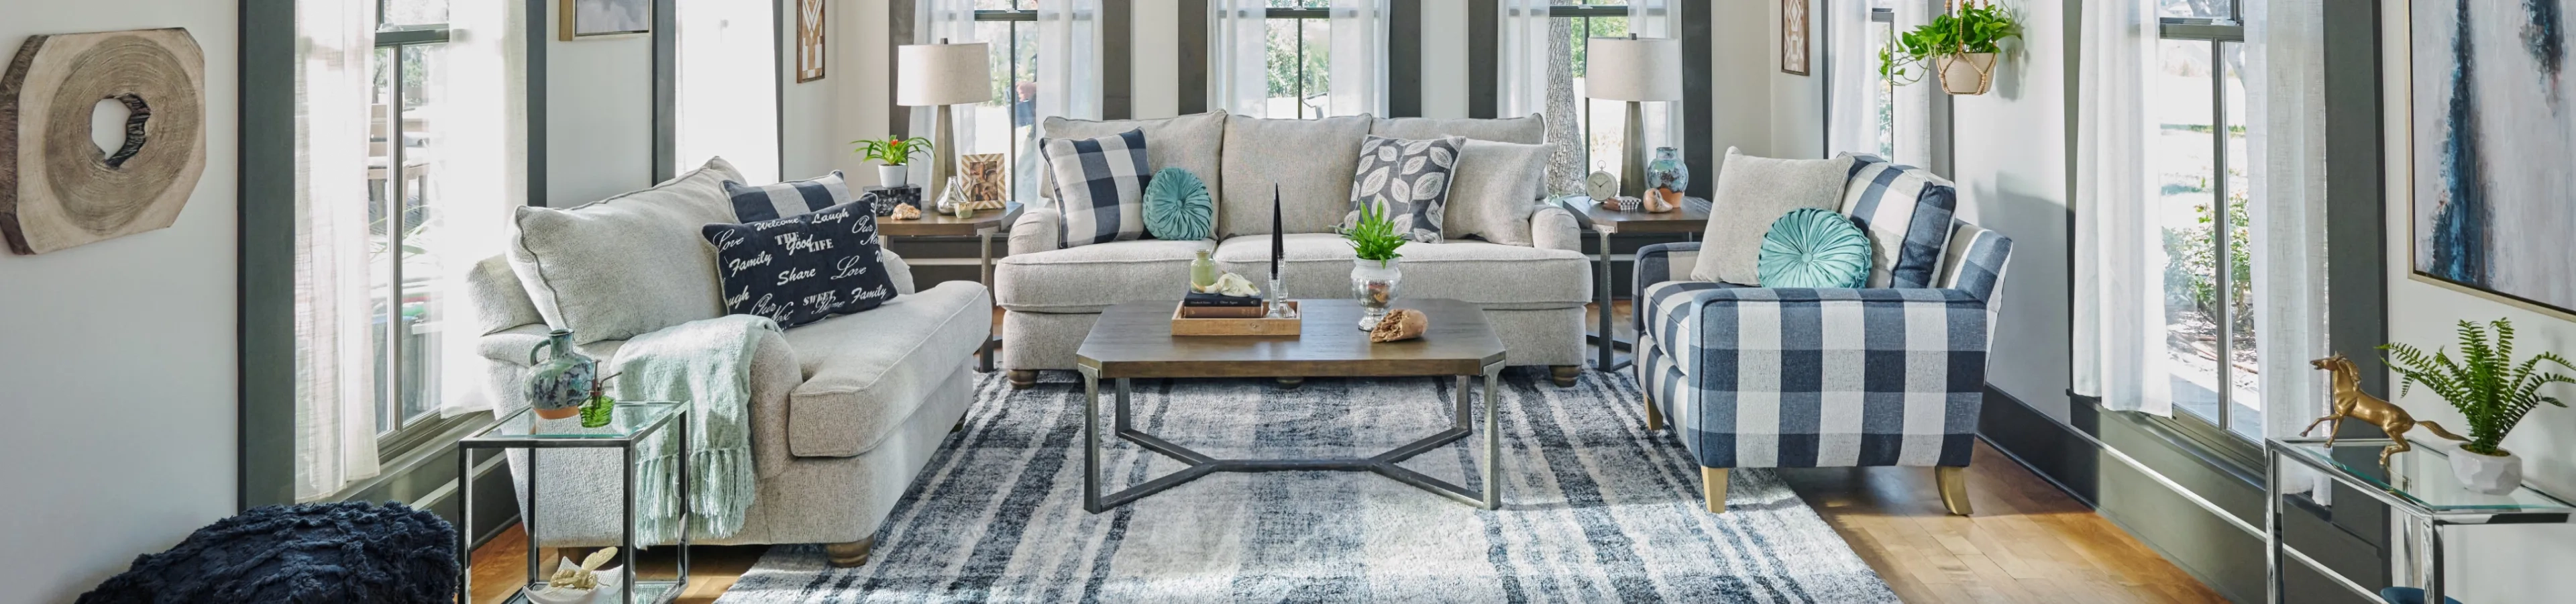 a grey and blue style living room with a gray sofa